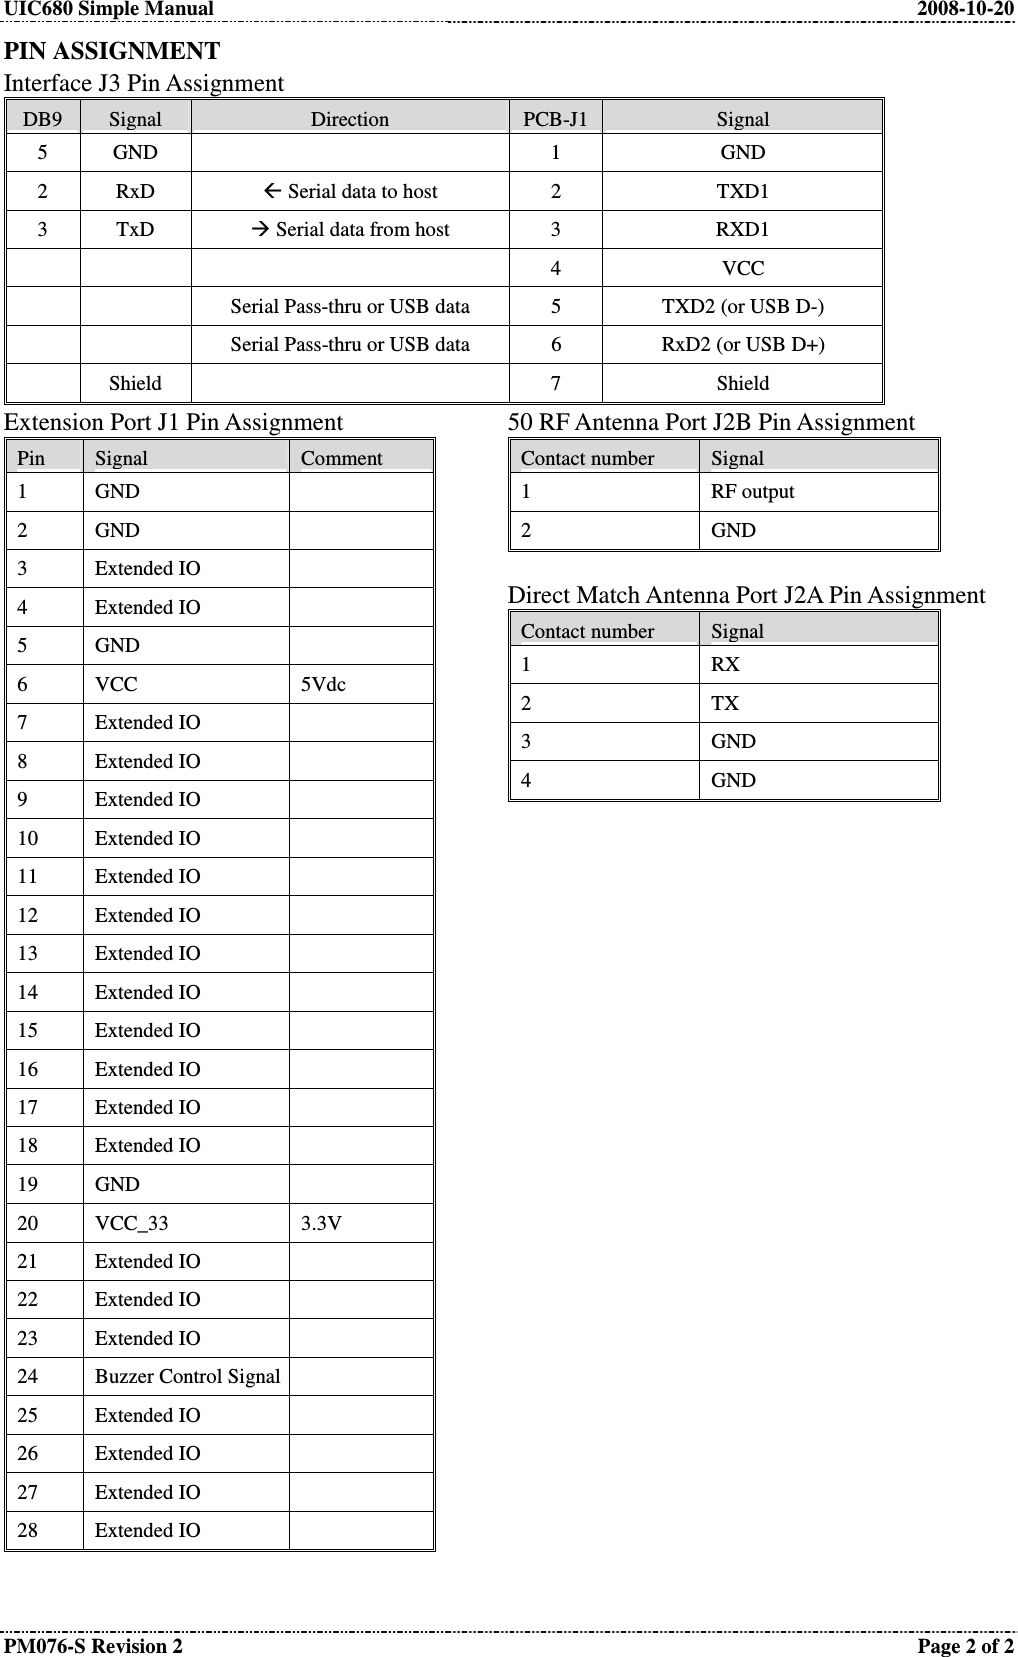 UIC680 Simple Manual  2008-10-20 PM076-S Revision 2  Page 2 of 2 PIN ASSIGNMENT Interface J3 Pin Assignment DB9 Signal Direction PCB-J1 Signal5 GND    1  GND 2 RxD   Serial data to host  2  TXD1 3 TxD   Serial data from host  3  RXD1      4  VCC     Serial Pass-thru or USB data  5  TXD2 (or USB D-)     Serial Pass-thru or USB data  6  RxD2 (or USB D+)  Shield    7  Shield Extension Port J1 Pin Assignment Pin Signal Comment1 GND   2 GND   3 Extended IO   4 Extended IO   5 GND   6 VCC  5Vdc 7 Extended IO   8 Extended IO   9 Extended IO   10 Extended IO   11 Extended IO   12 Extended IO   13 Extended IO   14 Extended IO   15 Extended IO   16 Extended IO   17 Extended IO   18 Extended IO   19 GND   20 VCC_33  3.3V 21 Extended IO   22 Extended IO   23 Extended IO   24  Buzzer Control Signal25 Extended IO   26 Extended IO   27 Extended IO   28 Extended IO   50 RF Antenna Port J2B Pin Assignment Contact number Signal1 RF output 2 GND Direct Match Antenna Port J2A Pin Assignment Contact number Signal1 RX 2 TX 3 GND 4 GND 